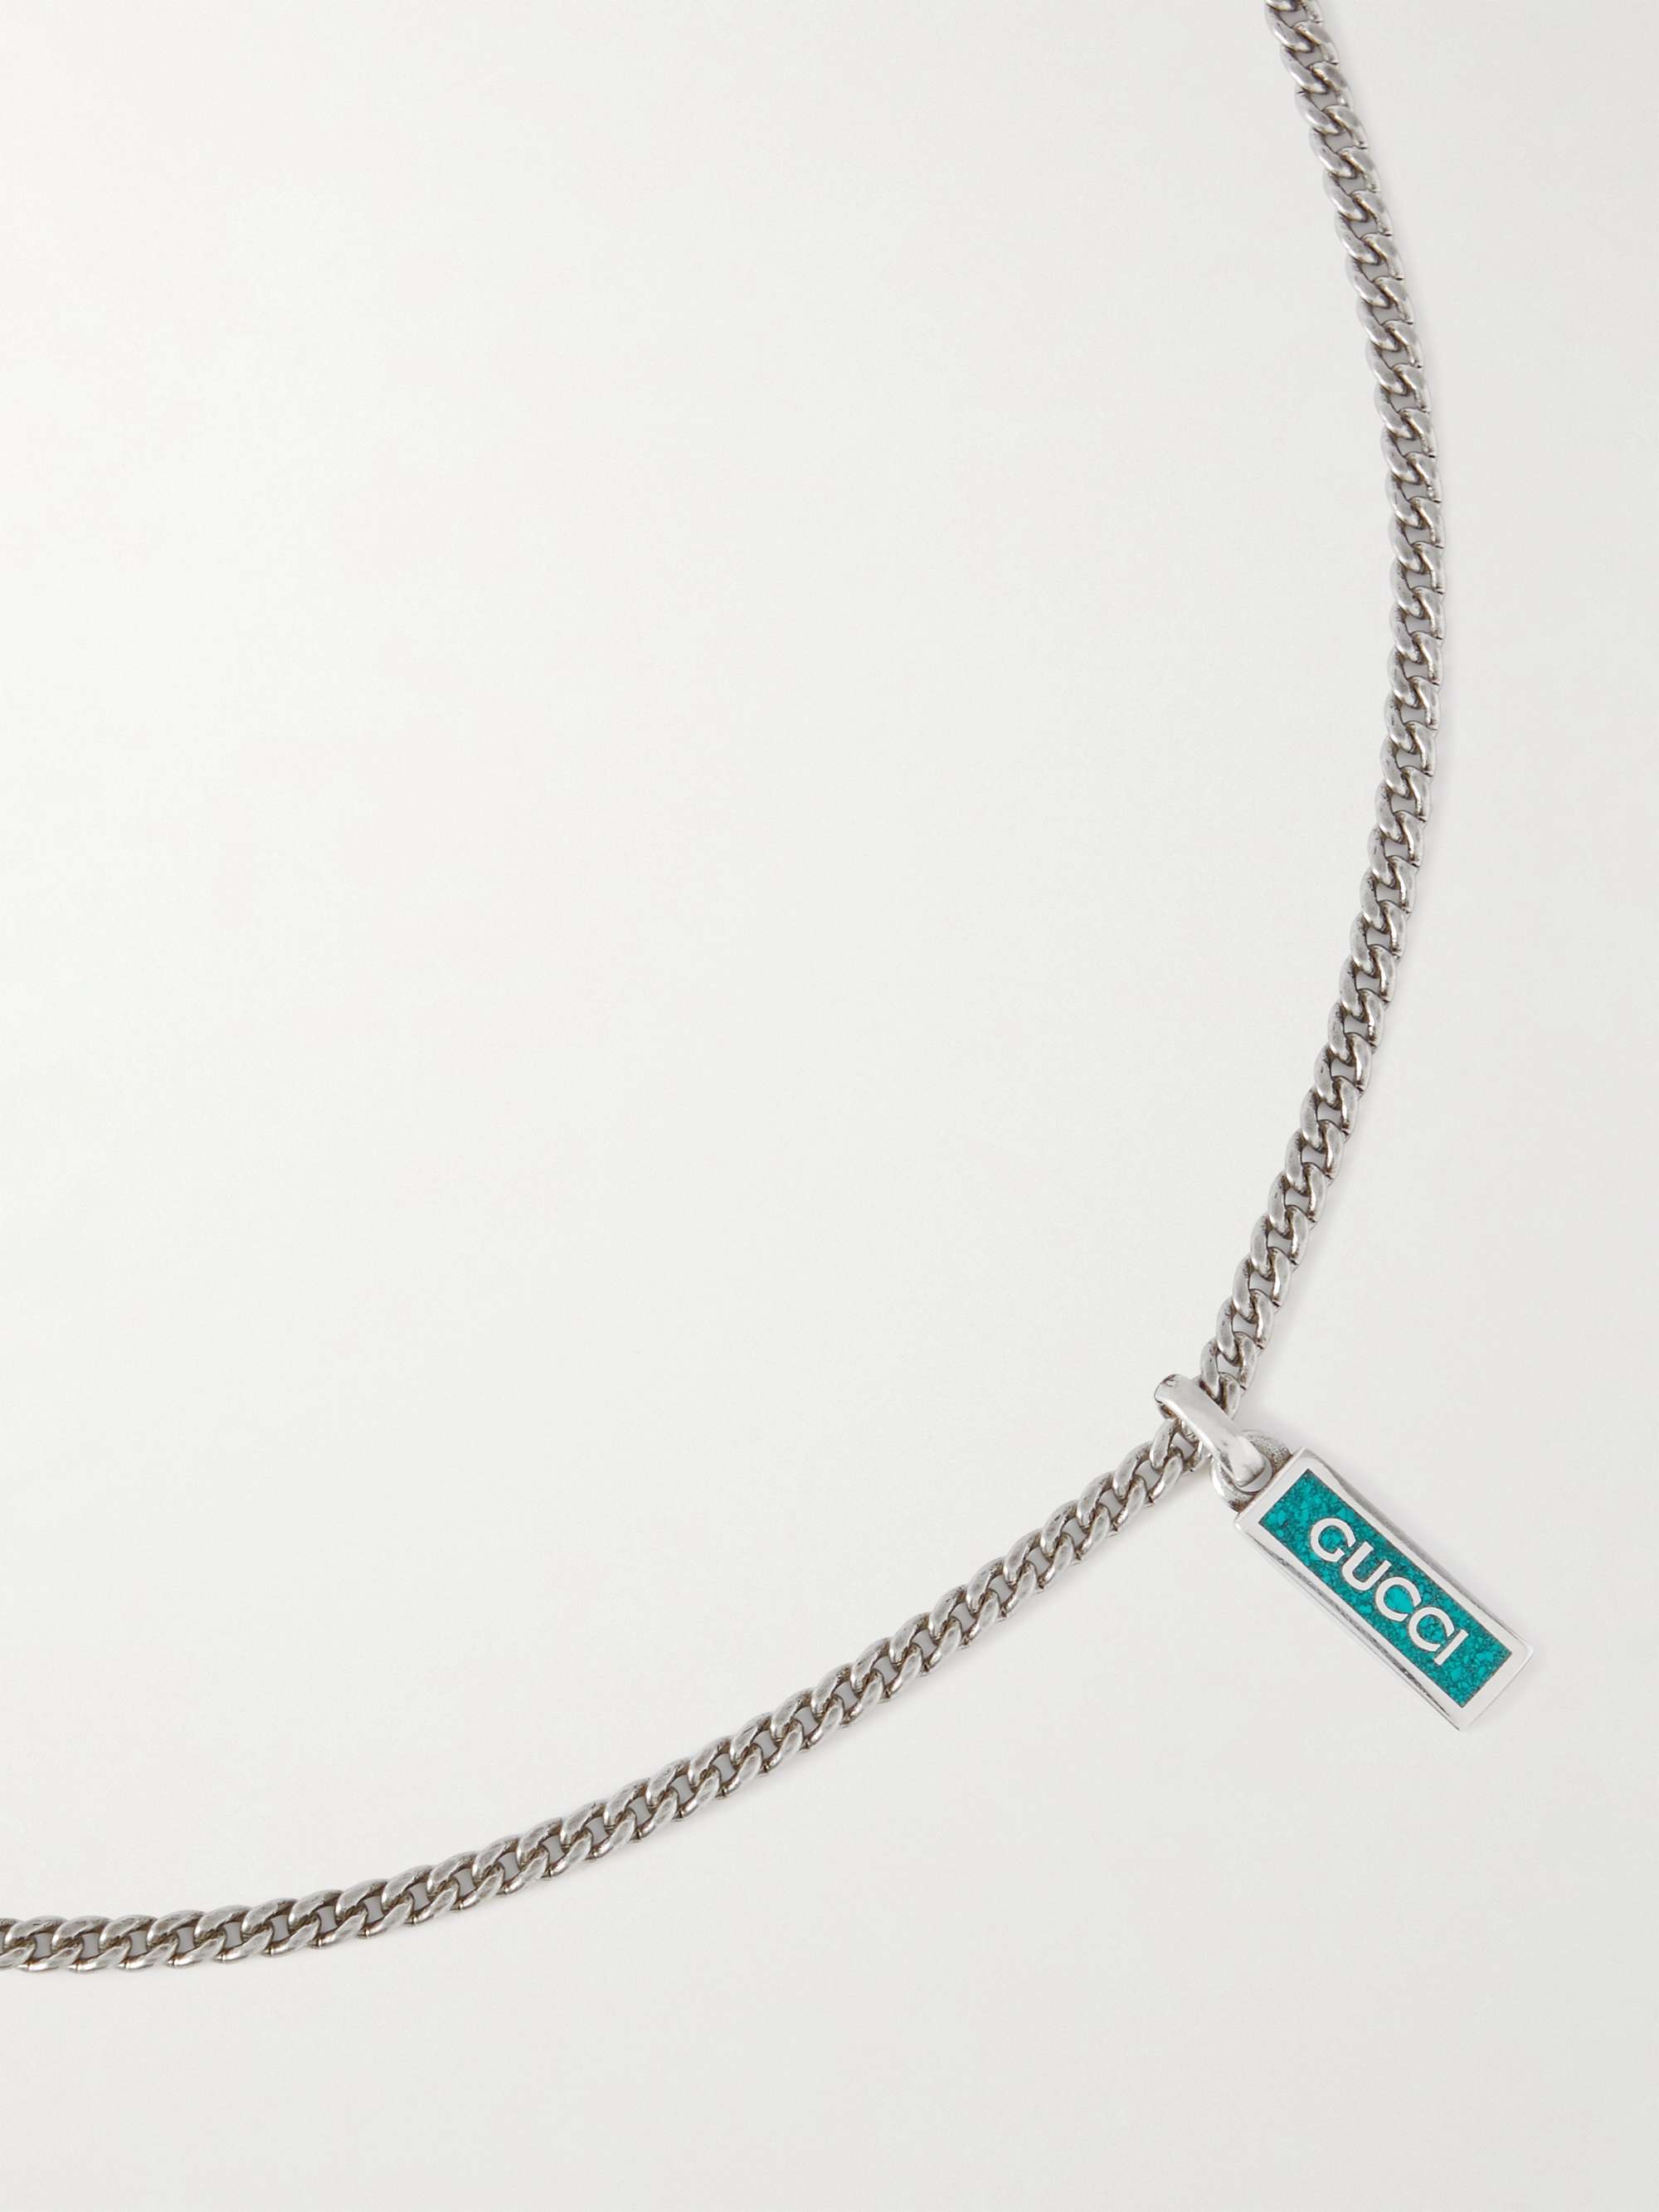 GUCCI Sterling Silver and Enamel Pendant Necklace